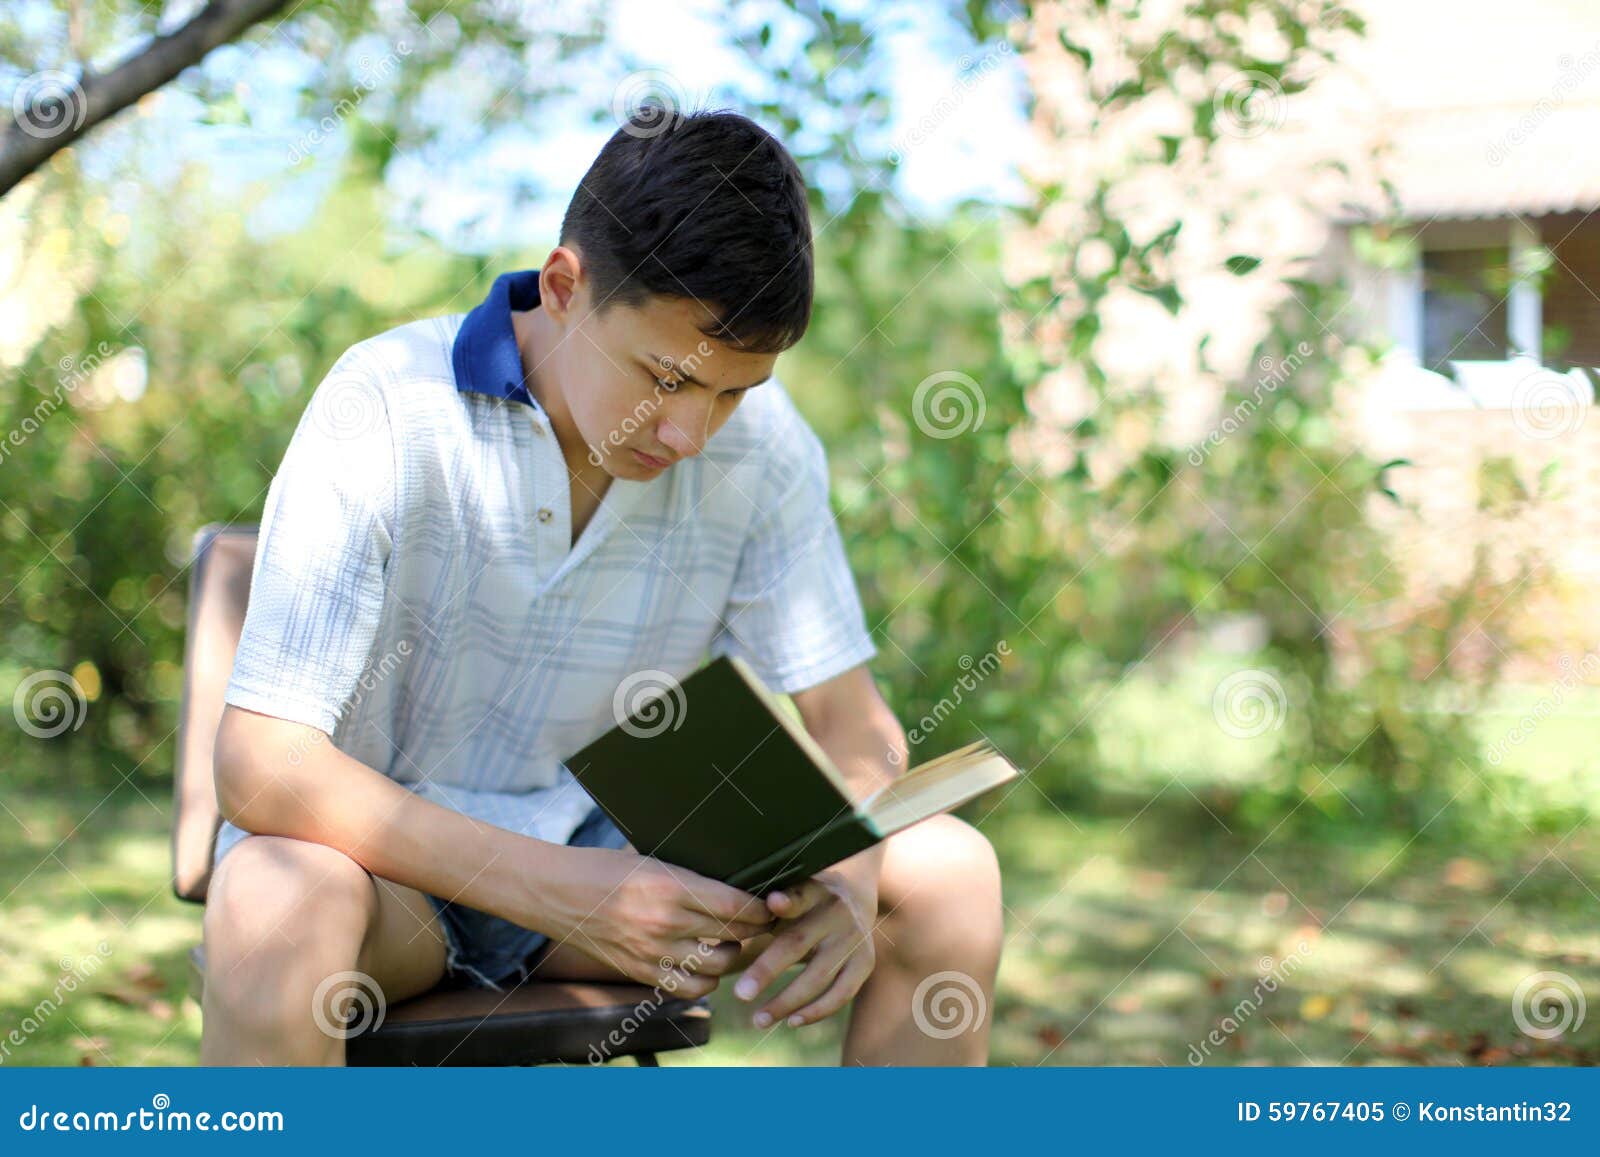 The Young Boy Reading Book outdoors